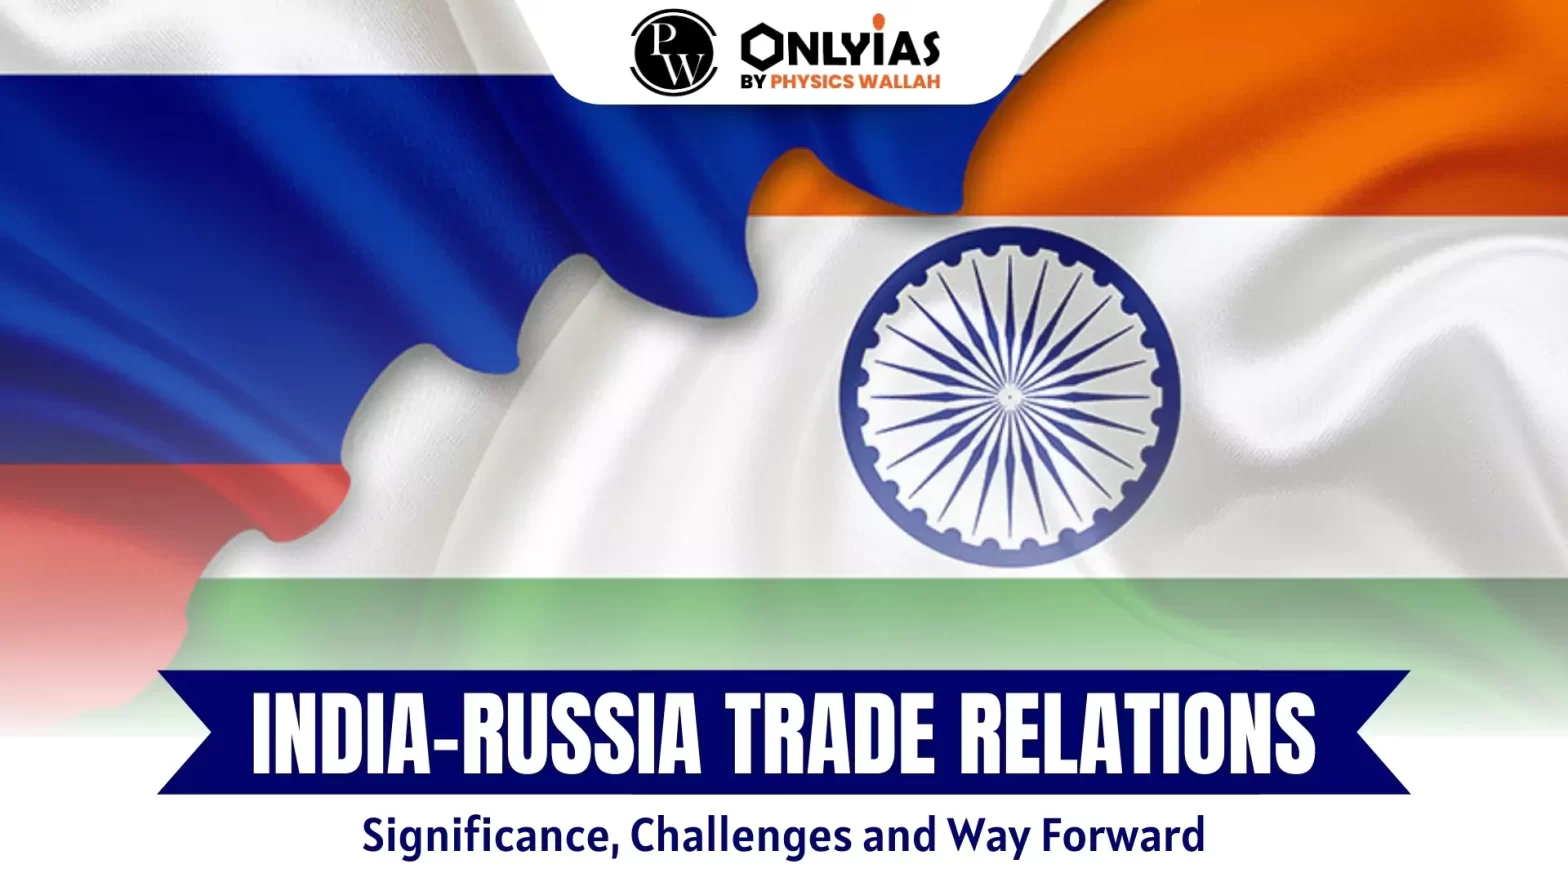 India Russia Trade Relations: Significance, Challenges and Way Forward